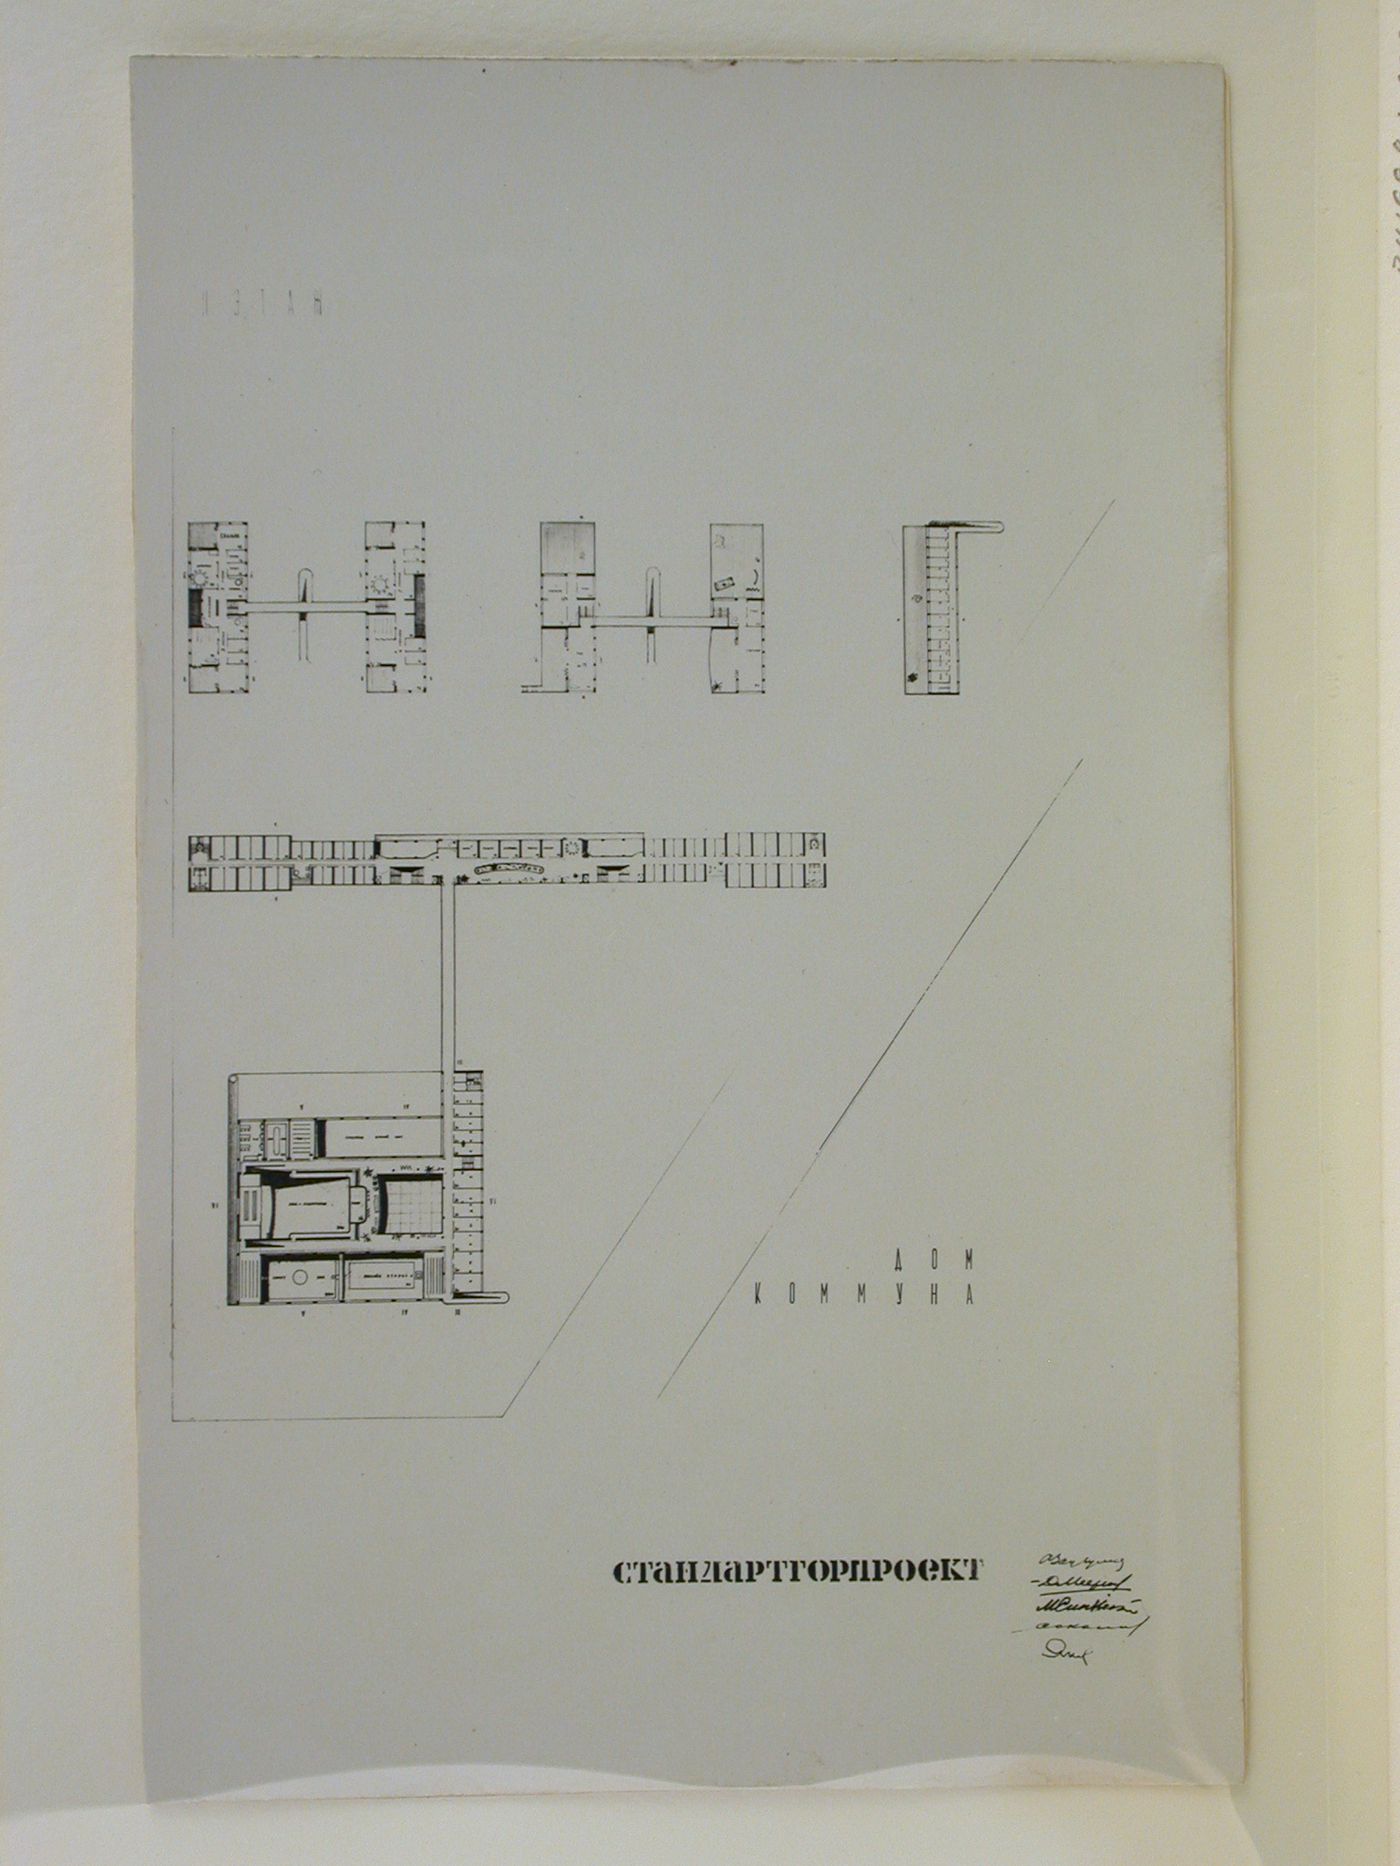 Photograph of a second floor plan for a house-commune, Krasnaia Presnia Street, Moscow